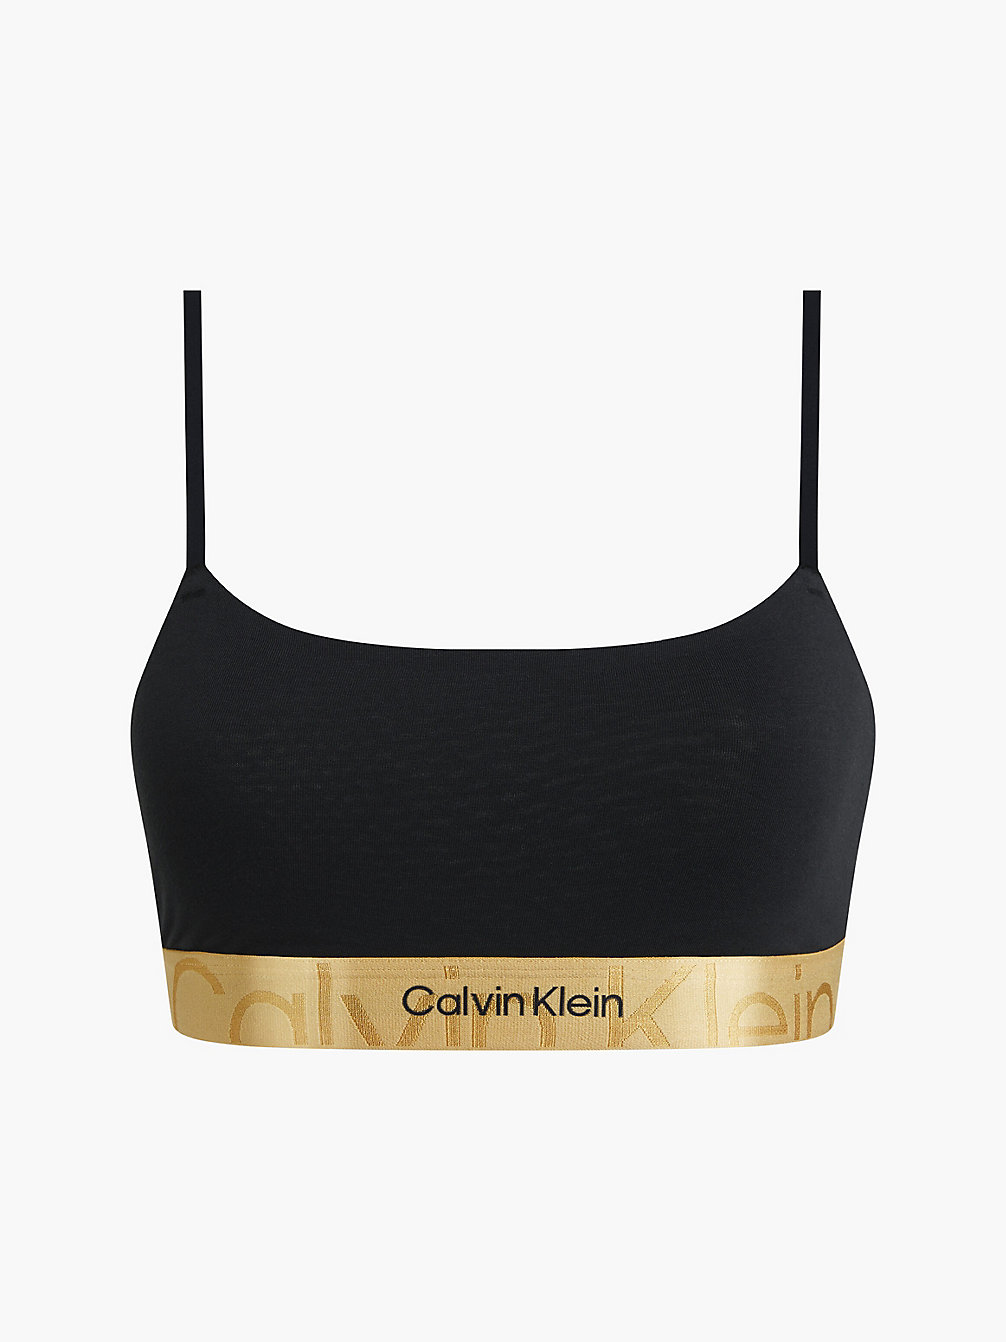 Brassière - Embossed Icon > BLACK W. OLD GOLD WSB > undefined donna > Calvin Klein